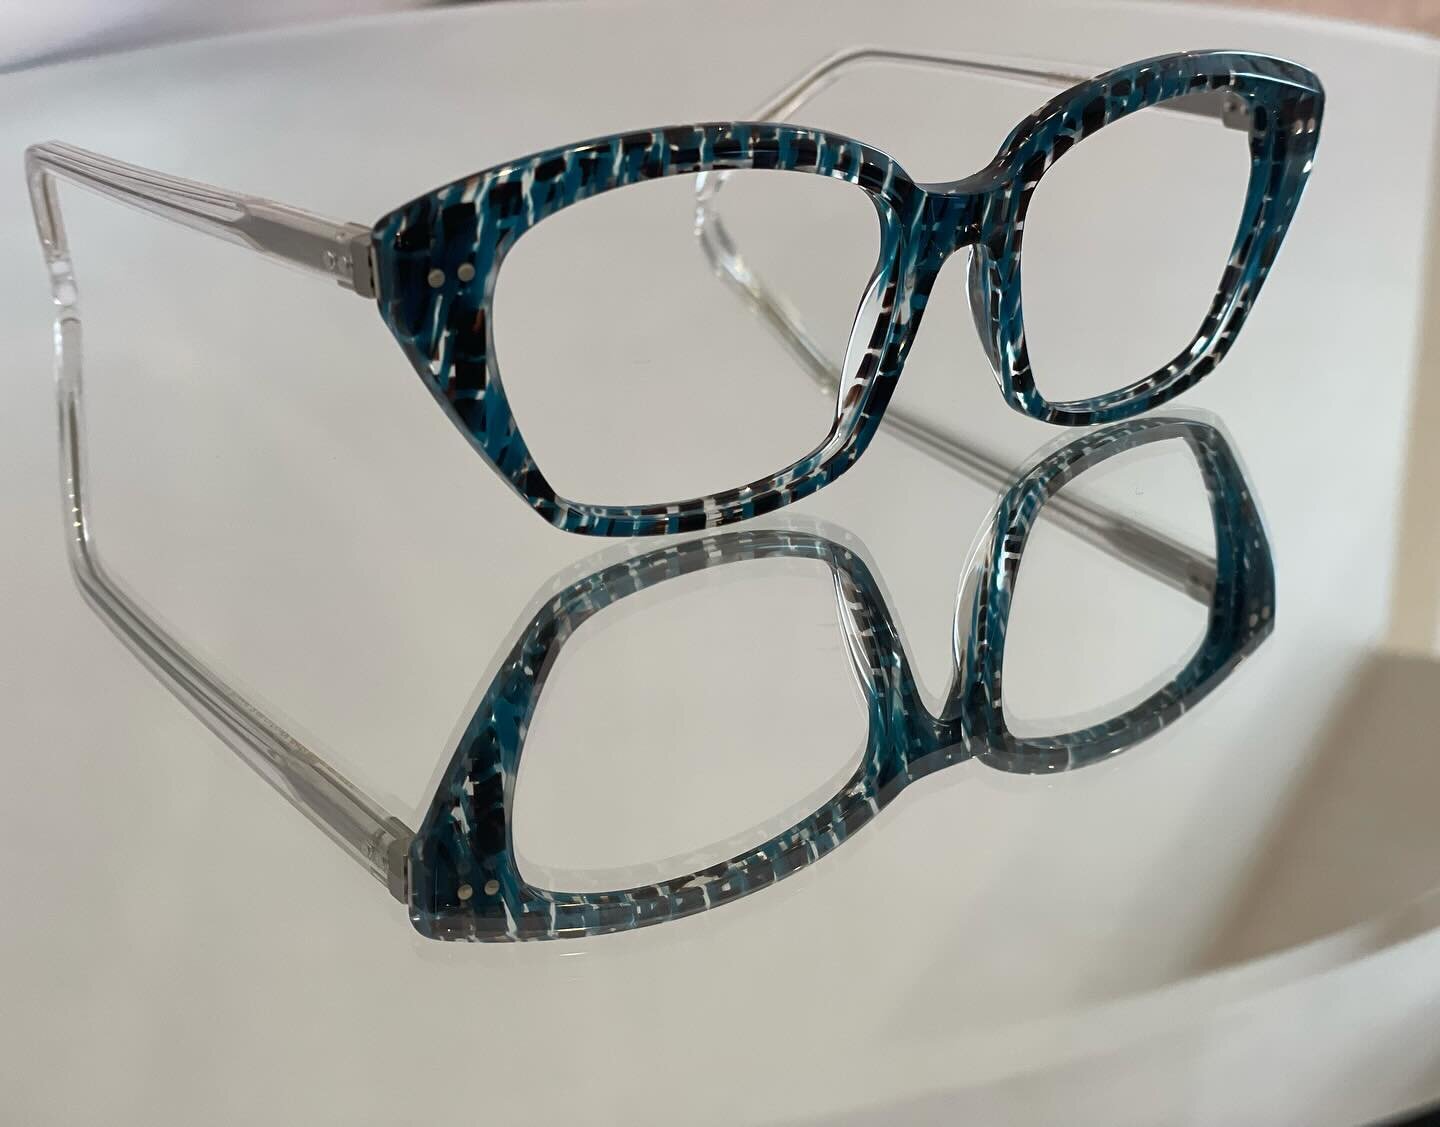 Custom made by Joanne for Joanne! Create yours today @terrioptics468 #frameoftheday